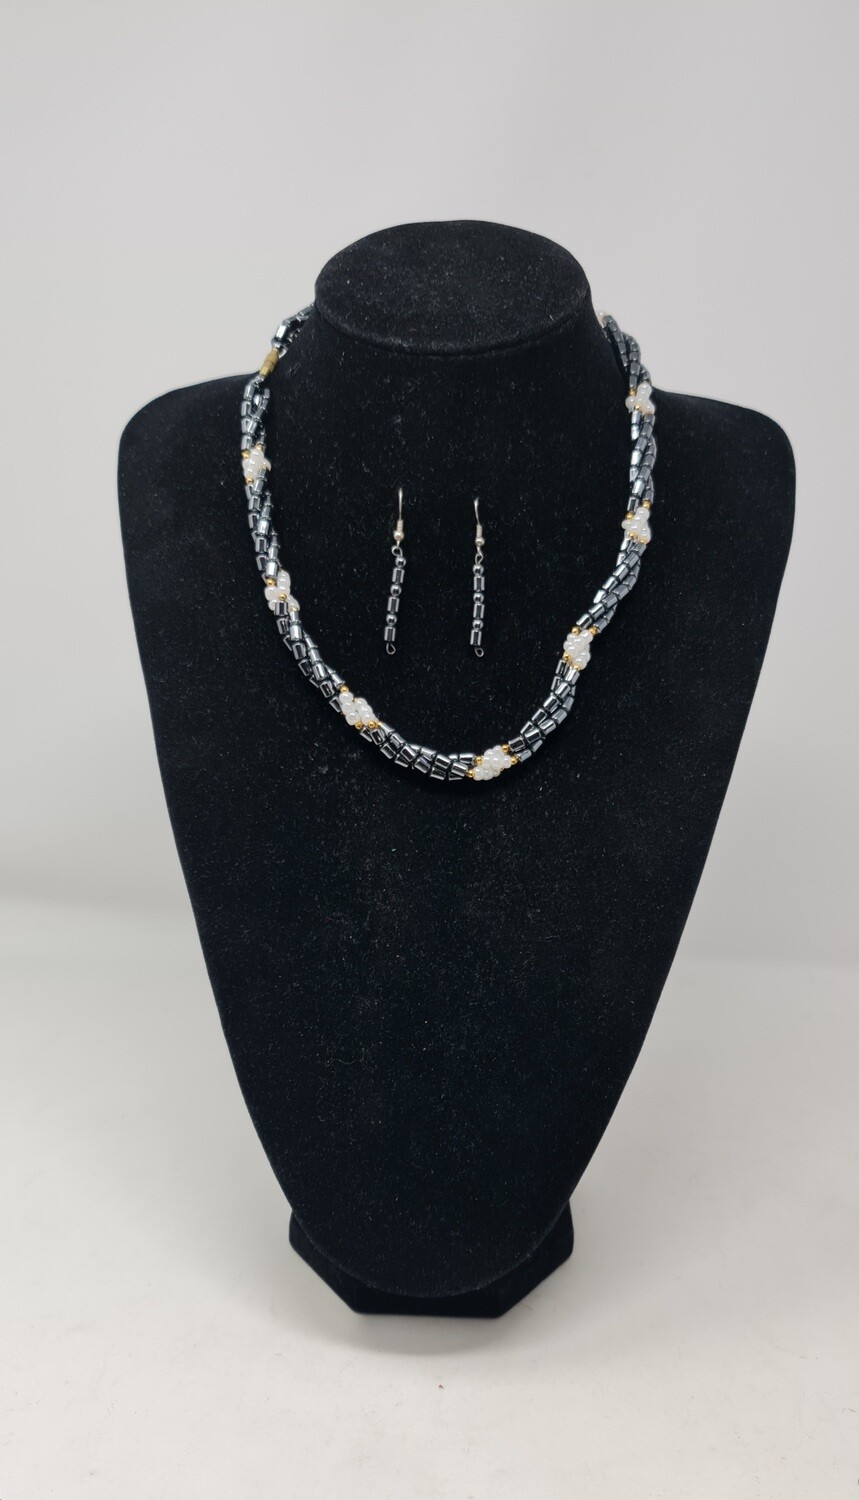 Hematite and Beads Mix Necklace Set with Matching Earrings